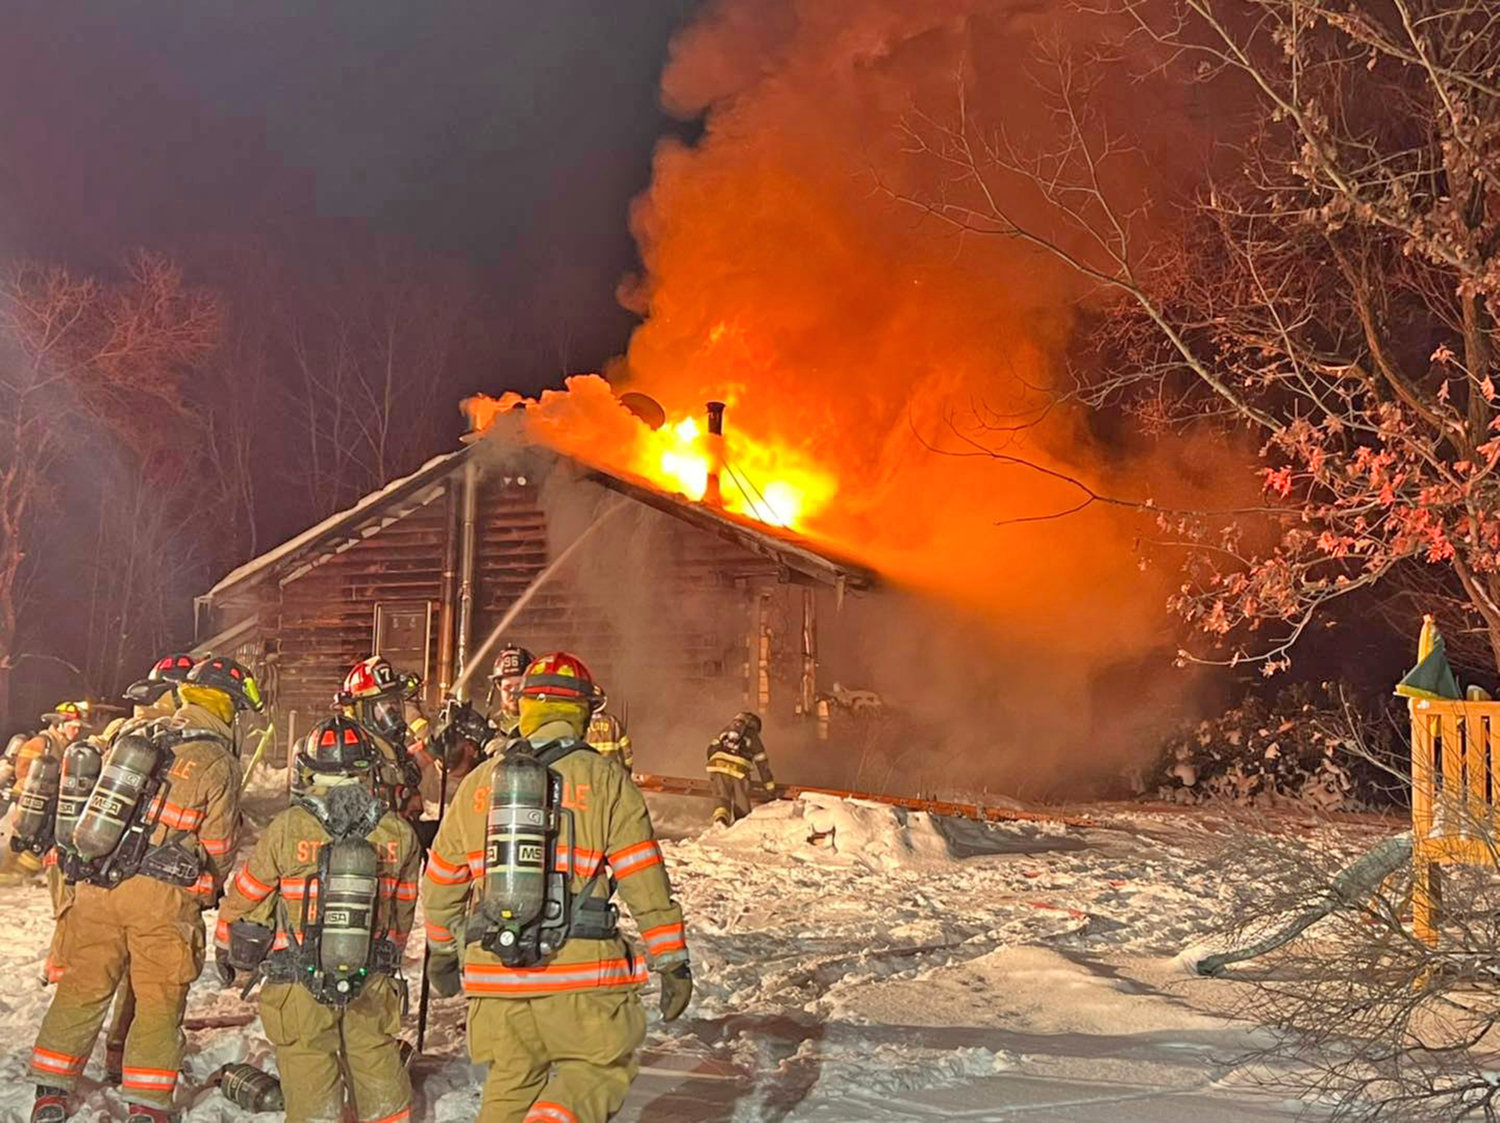 EARLY MORNING BLAZE — Stittville firefighters head towards a house fire on Soule Road in Floyd at about 3 a.m. Sunday. Crews battled frigid temperatures and very icy conditions to knock down the fire at the one-story residence.